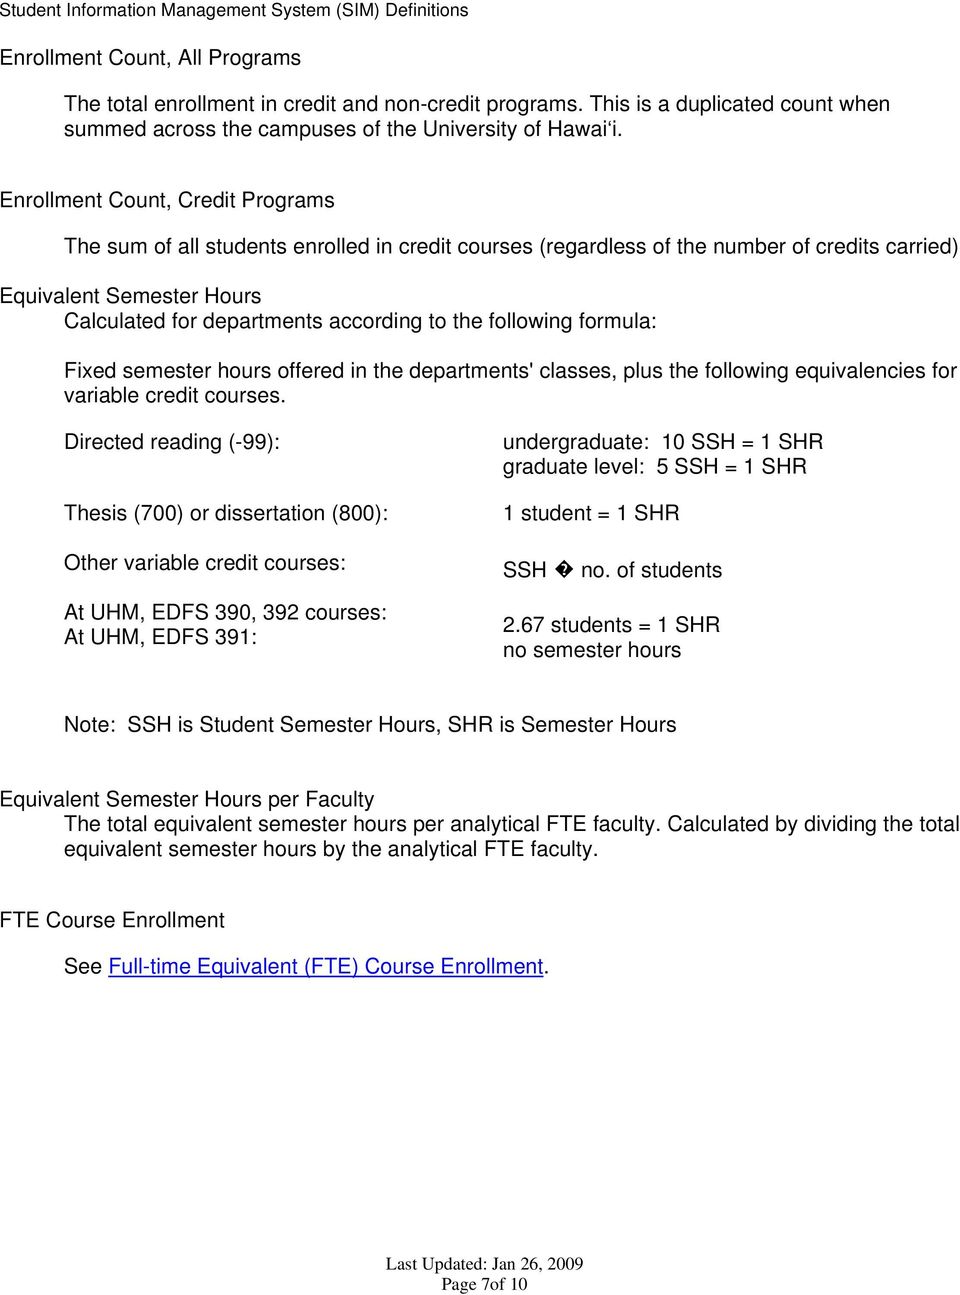 the following formula: Fixed semester hours offered in the departments' classes, plus the following equivalencies for variable credit courses.